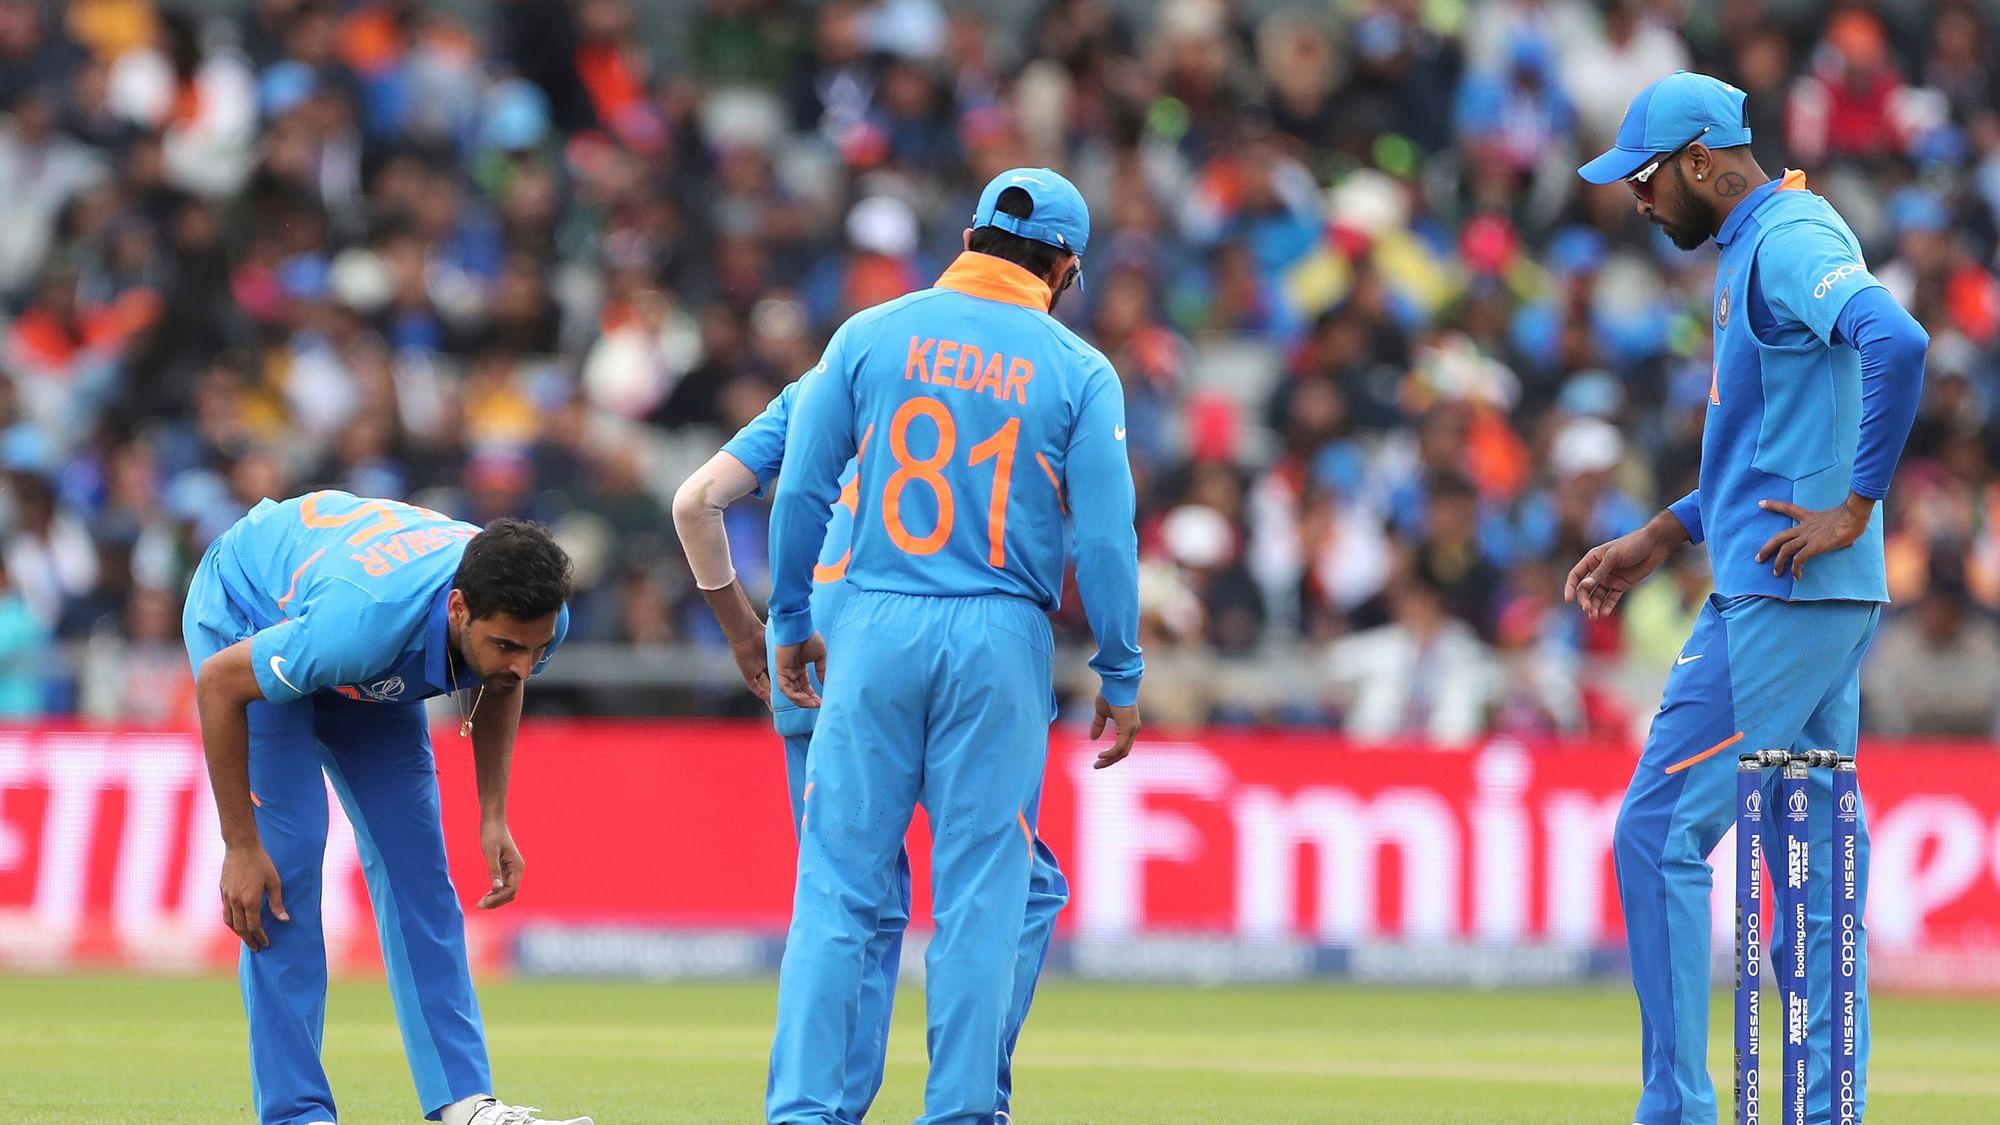 Bhuvneshwar Kumar injured his left hamstring and has been ruled out of the match against Pakistan.